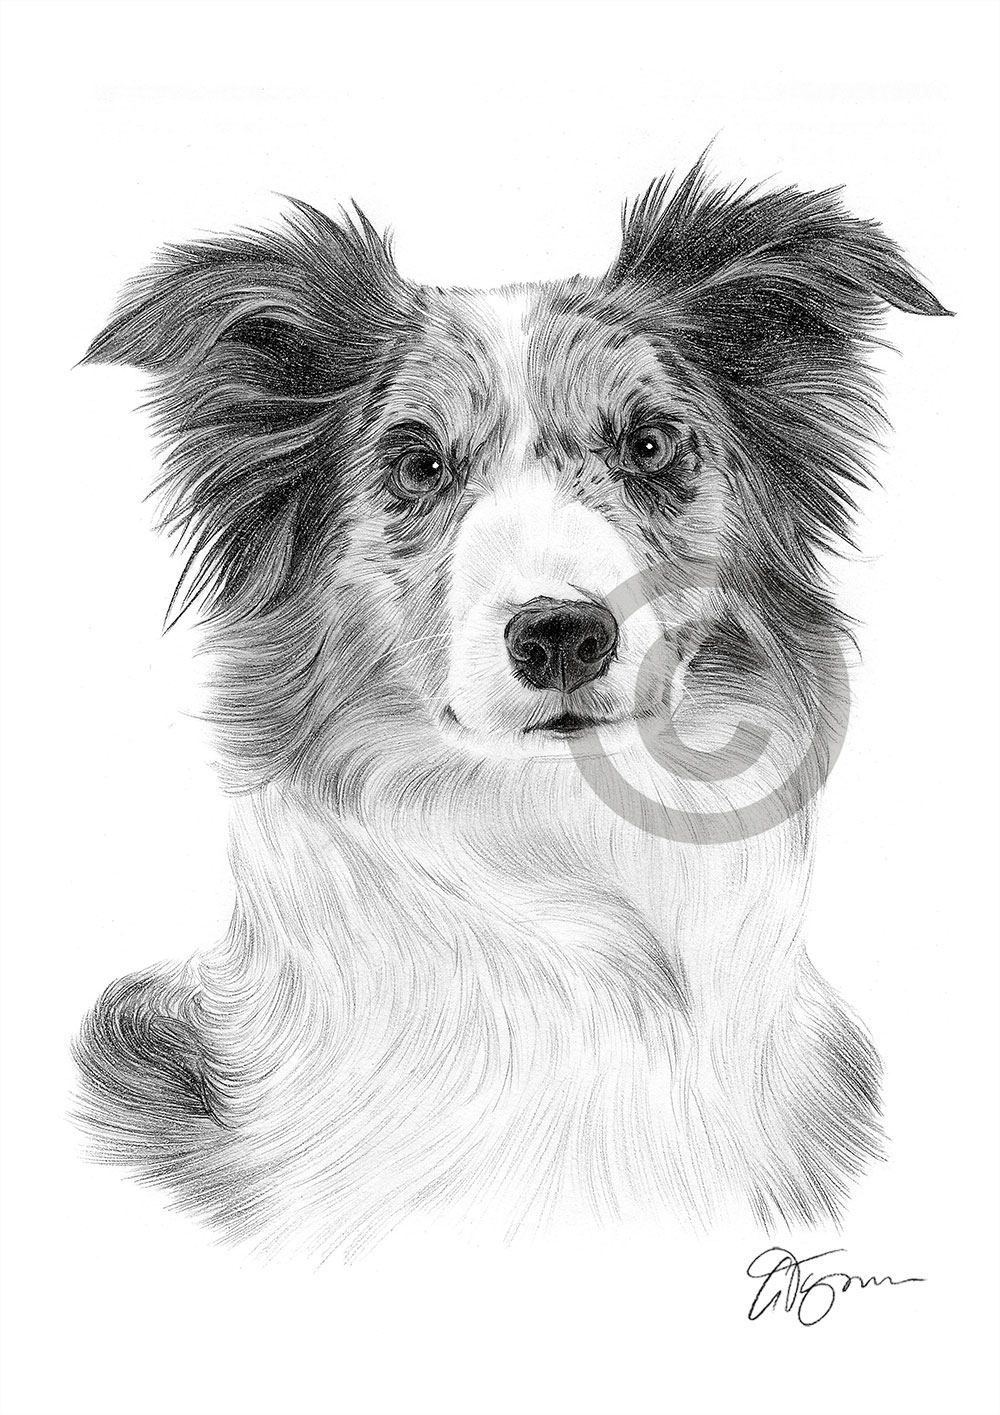 Pencil drawing of a Blue Merle Border Collie